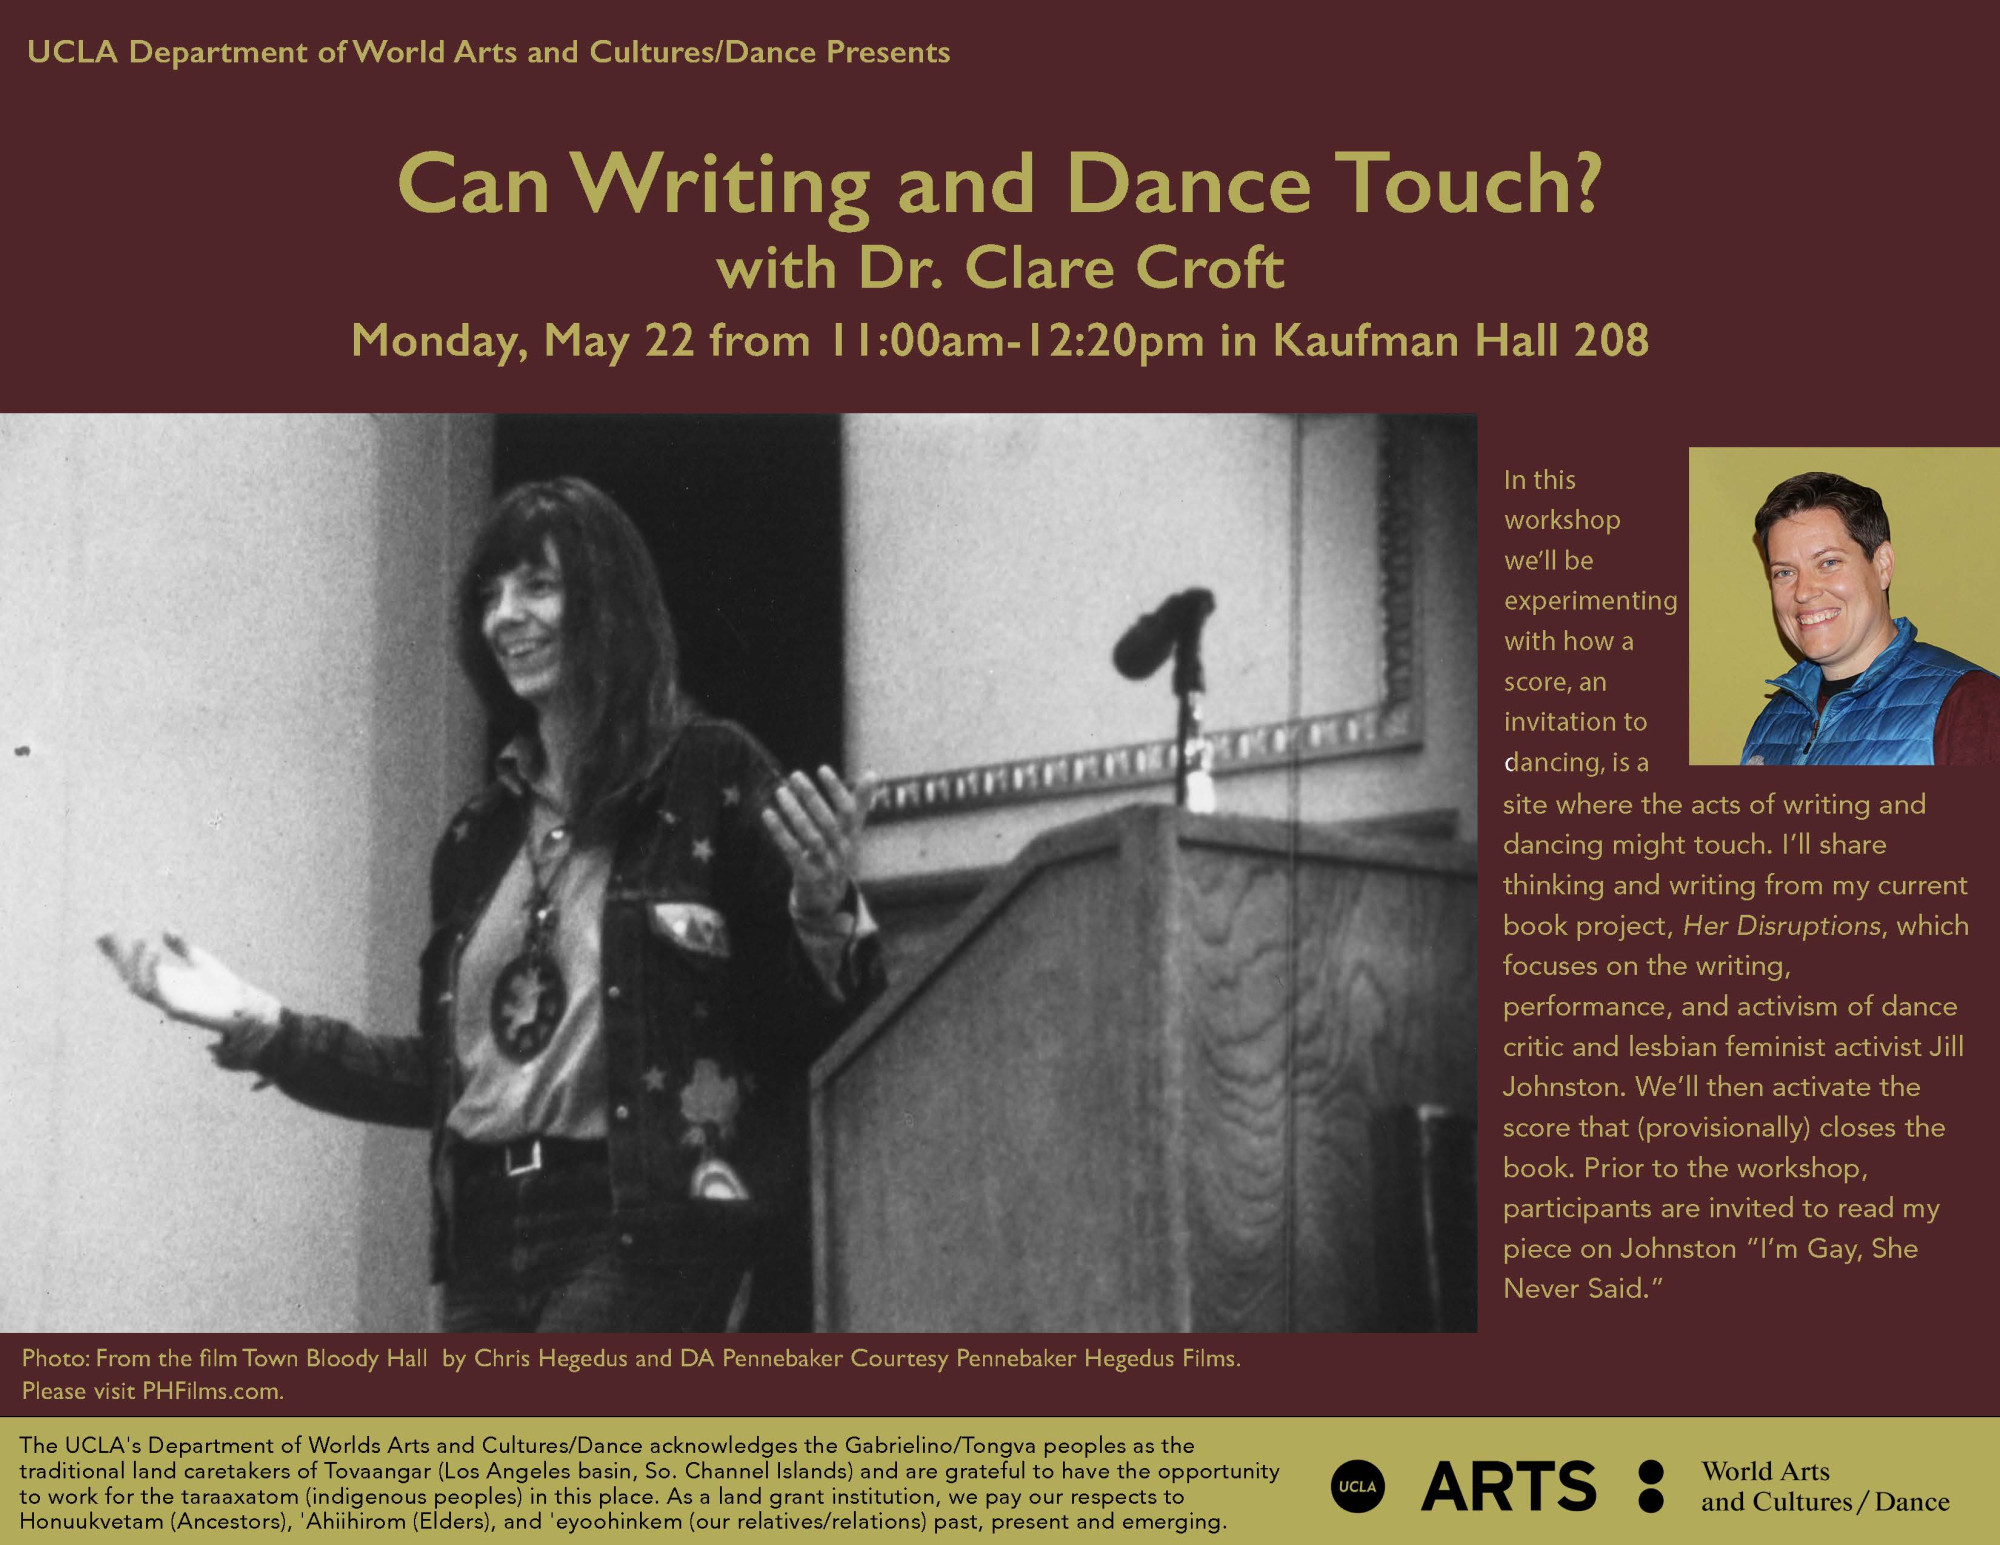 Can Writing and Dance Touch? with Dr. Clare Croft